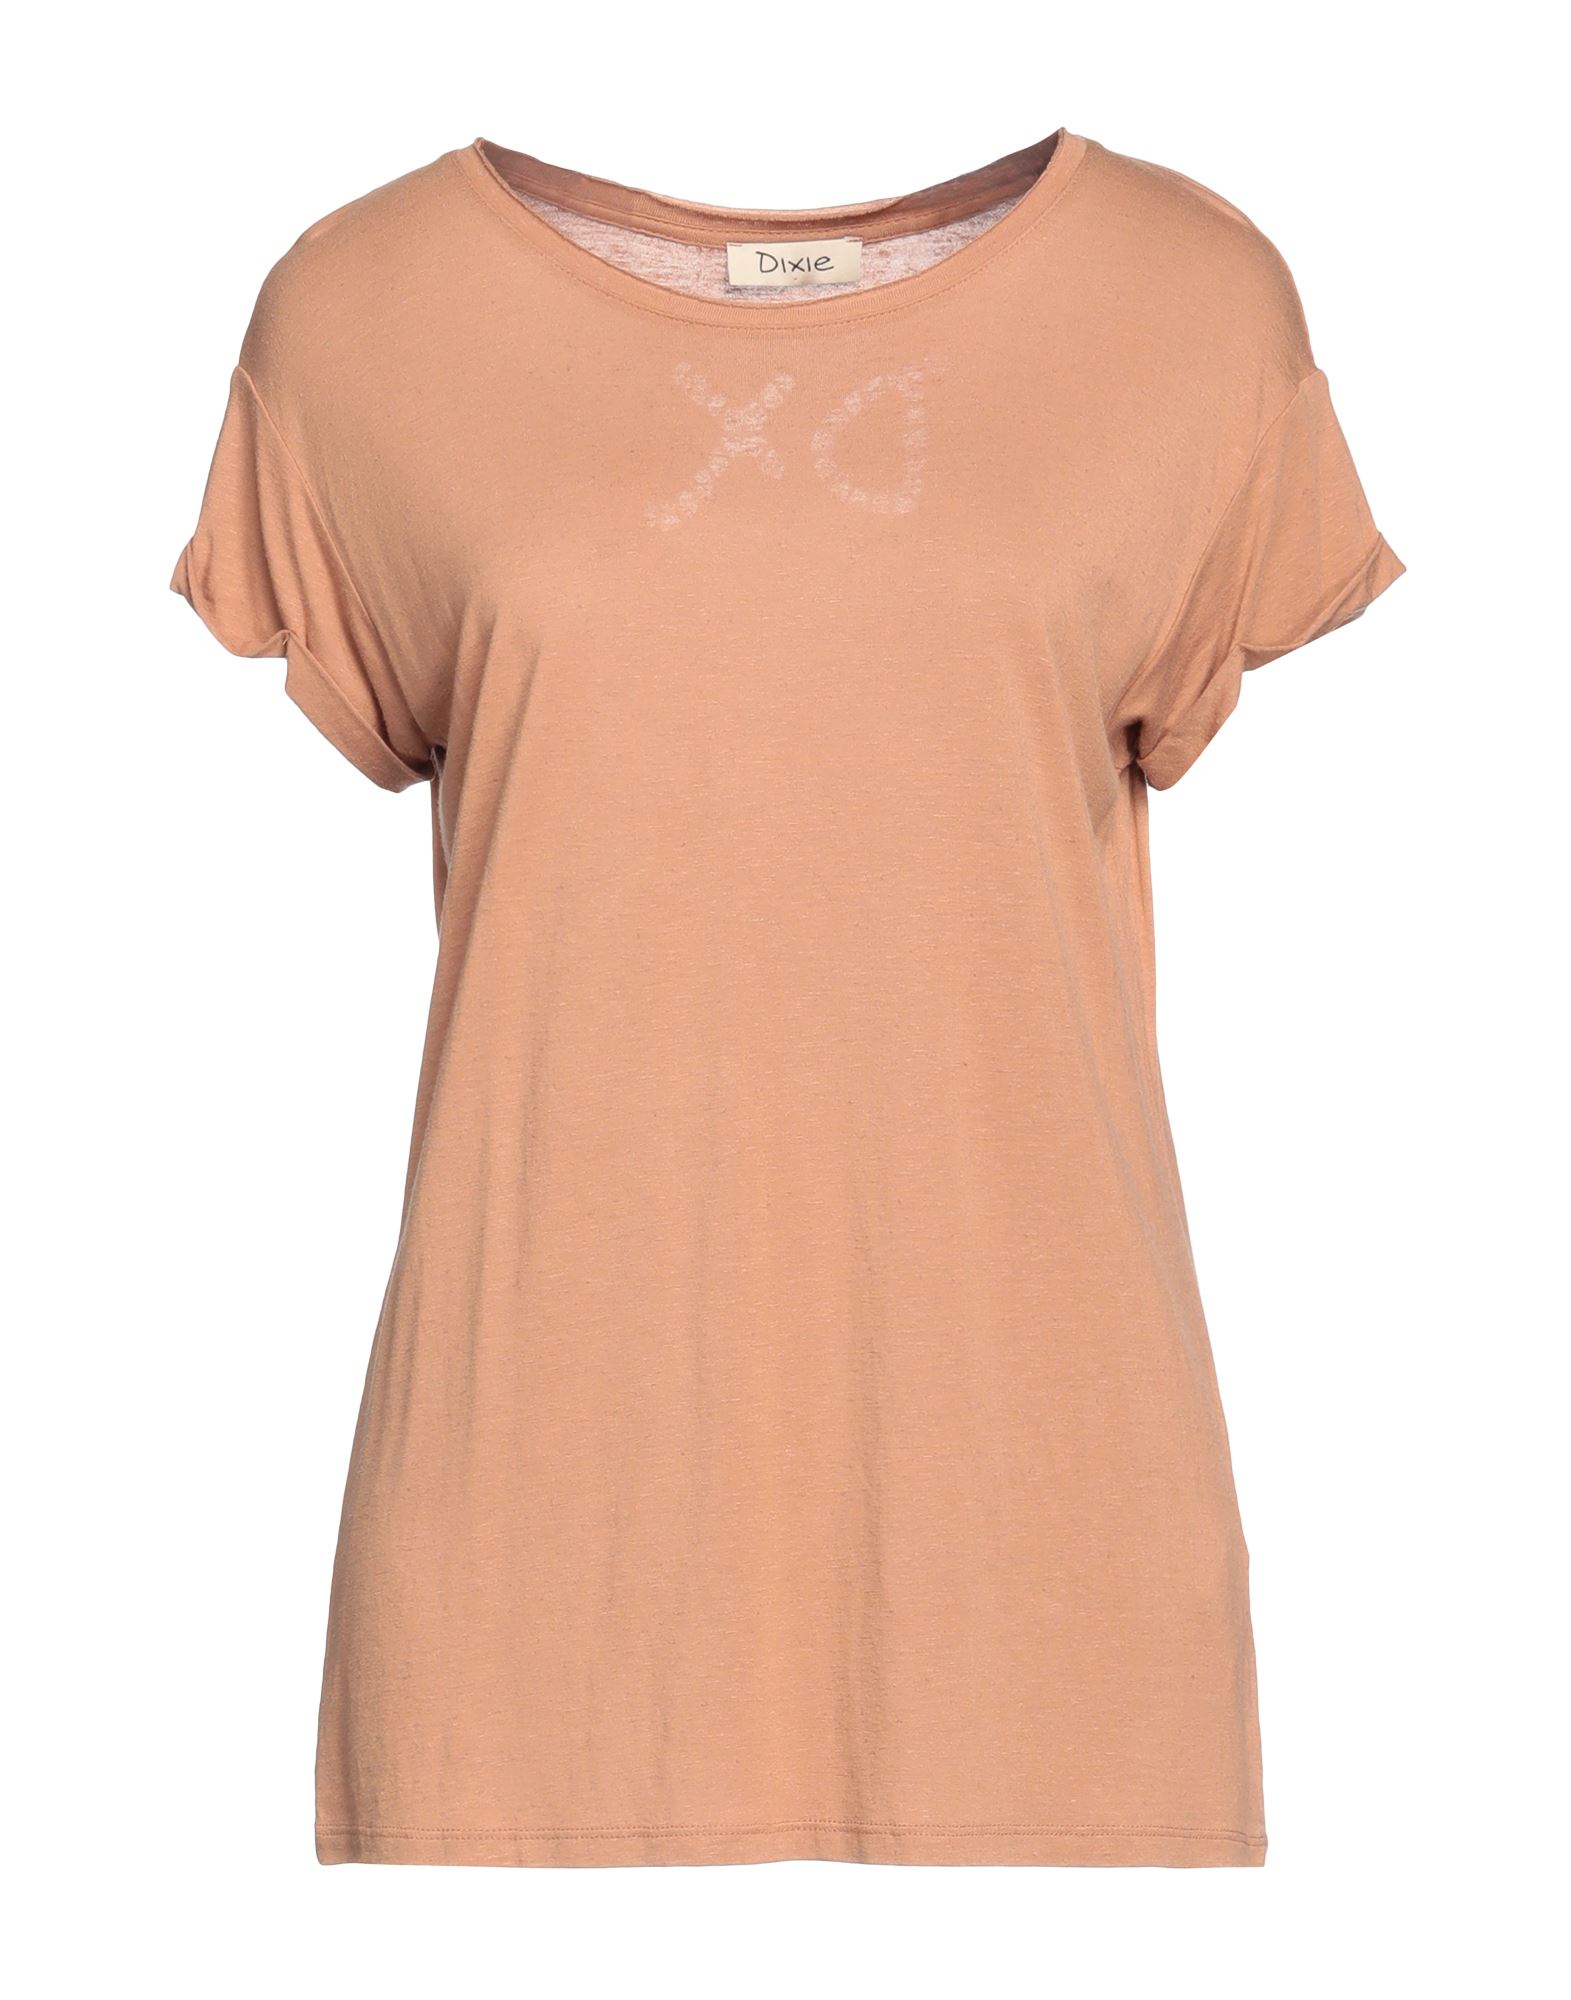 Dixie T-shirts In Beige